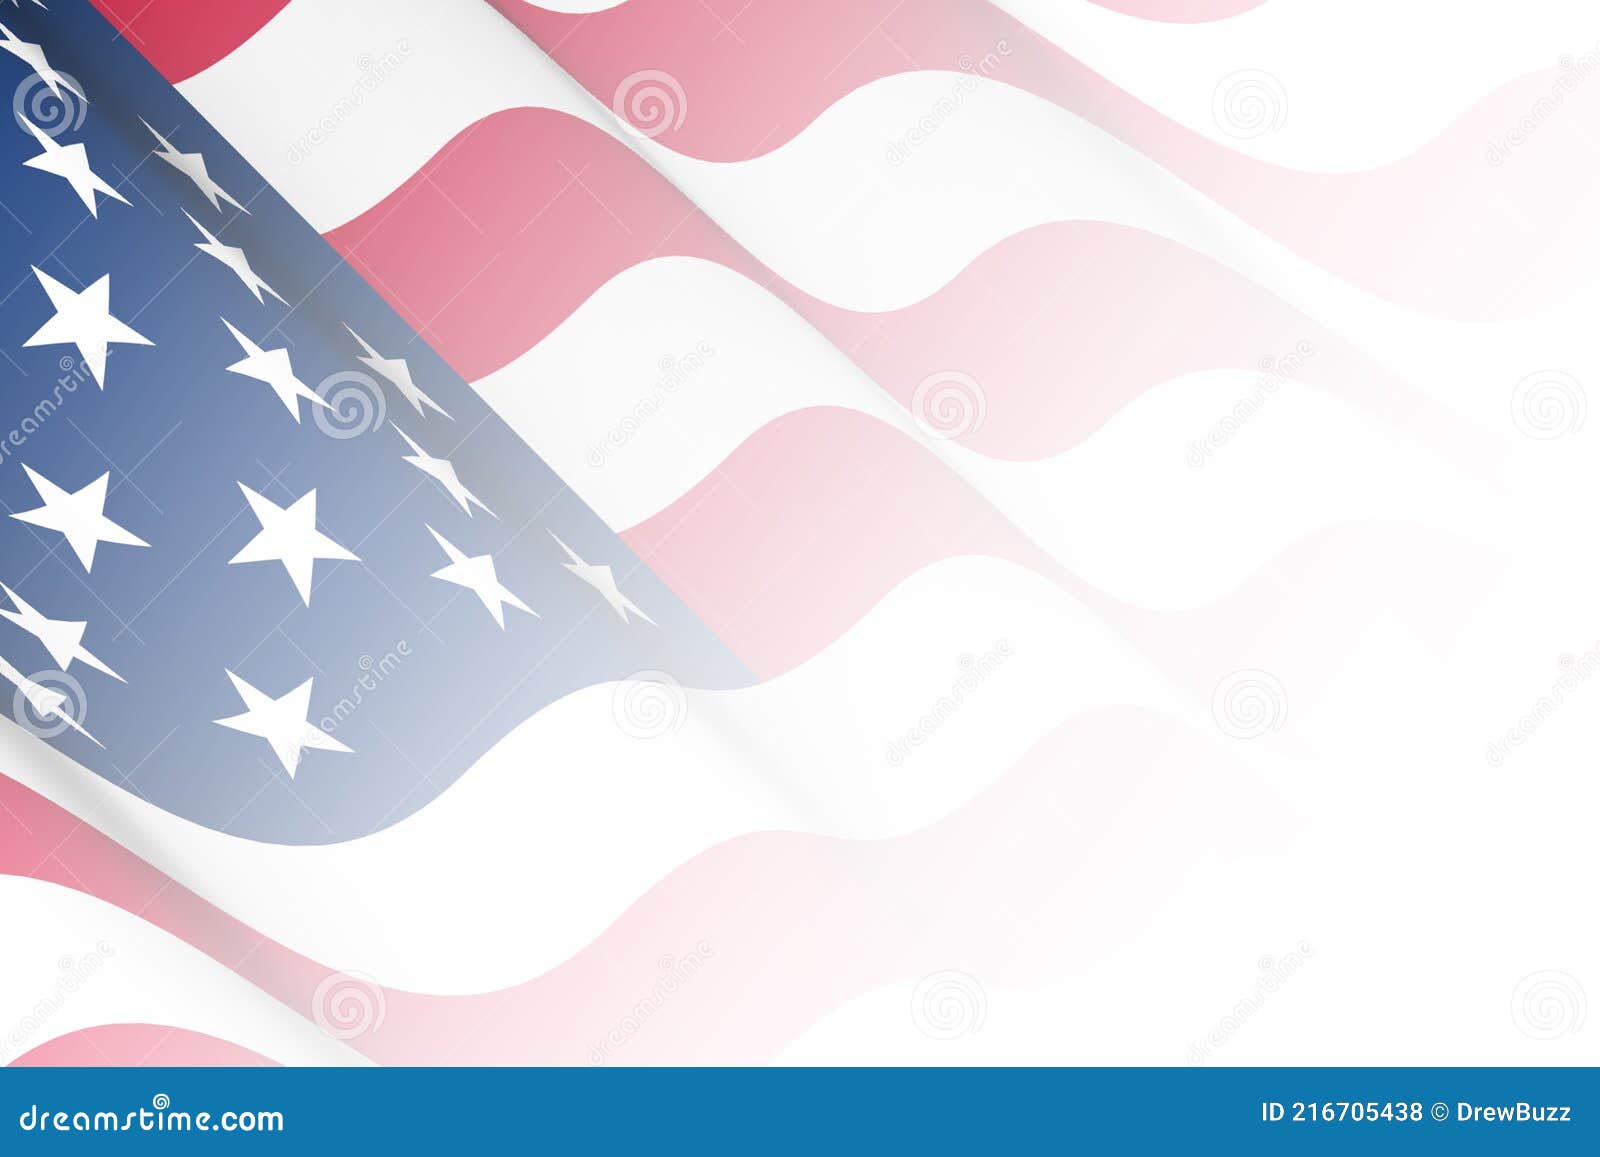 a faded waving red white blue american flag background gradient  card